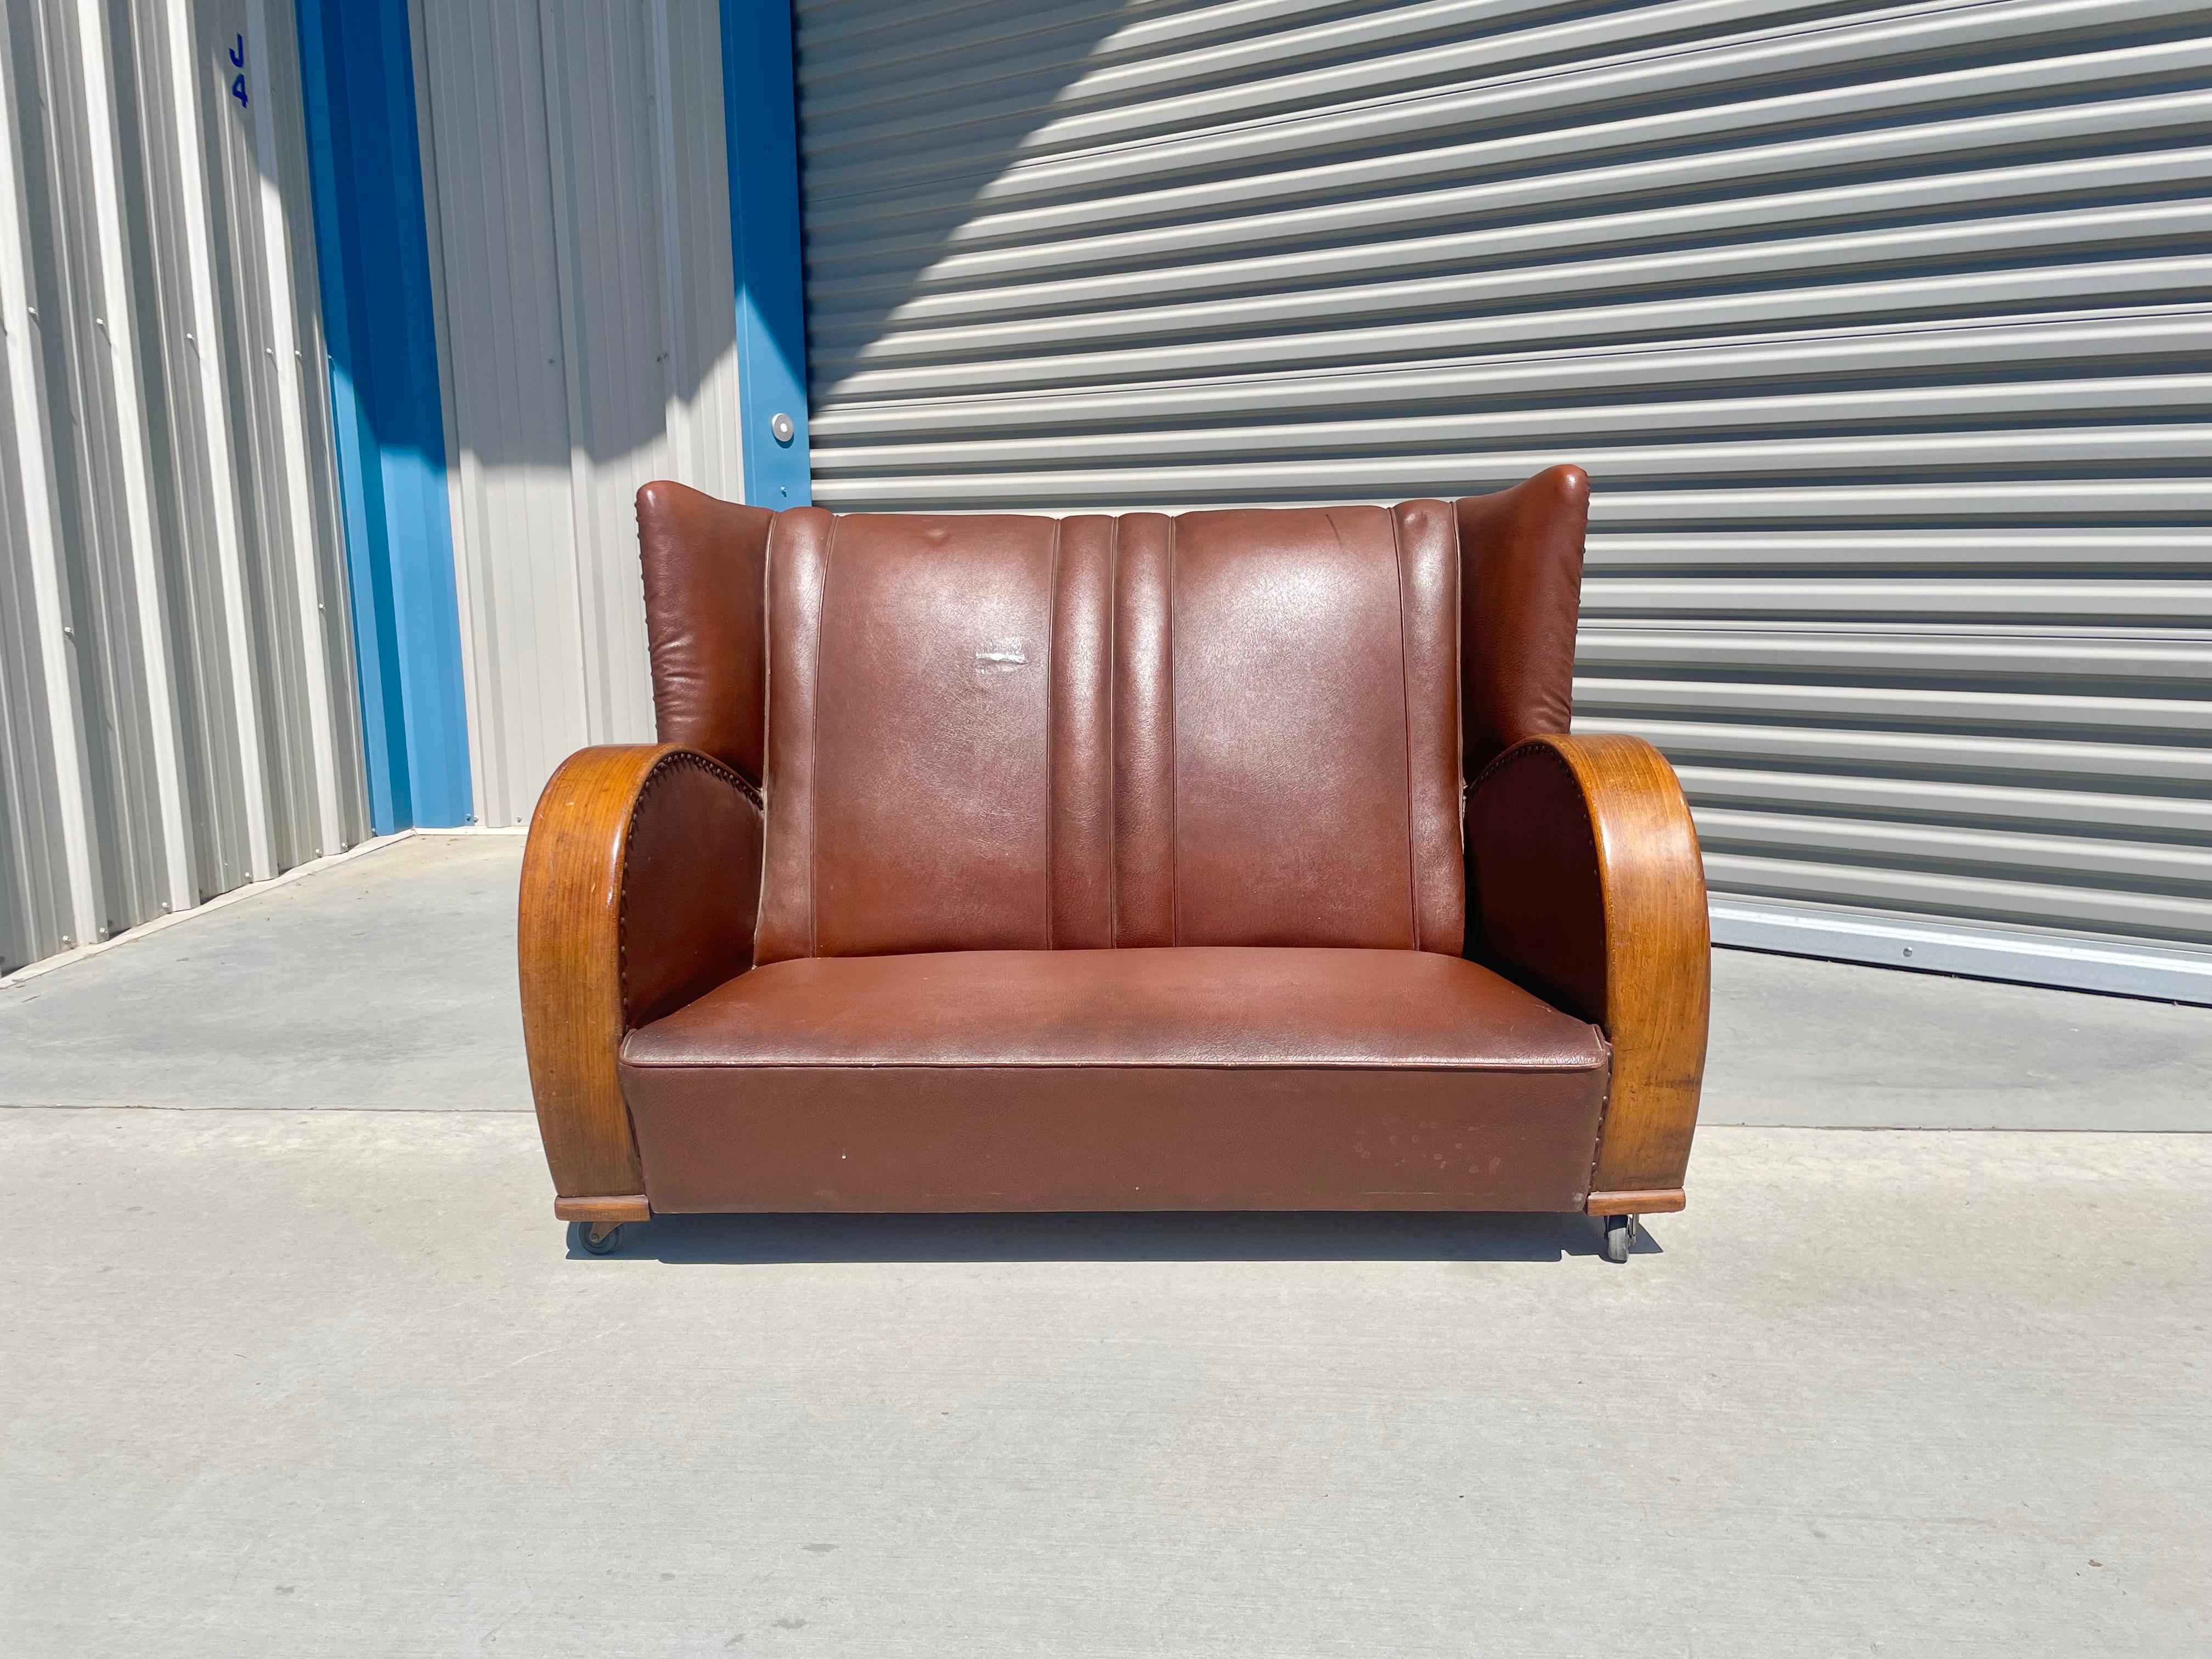 Vintage art deco leather loveseat manufactured in the united states, circa 1970s. This beautiful loveseat features two barrel form armrests that lead down, giving it a tremendous distinctive design for its era. The loveseat also features wheels on